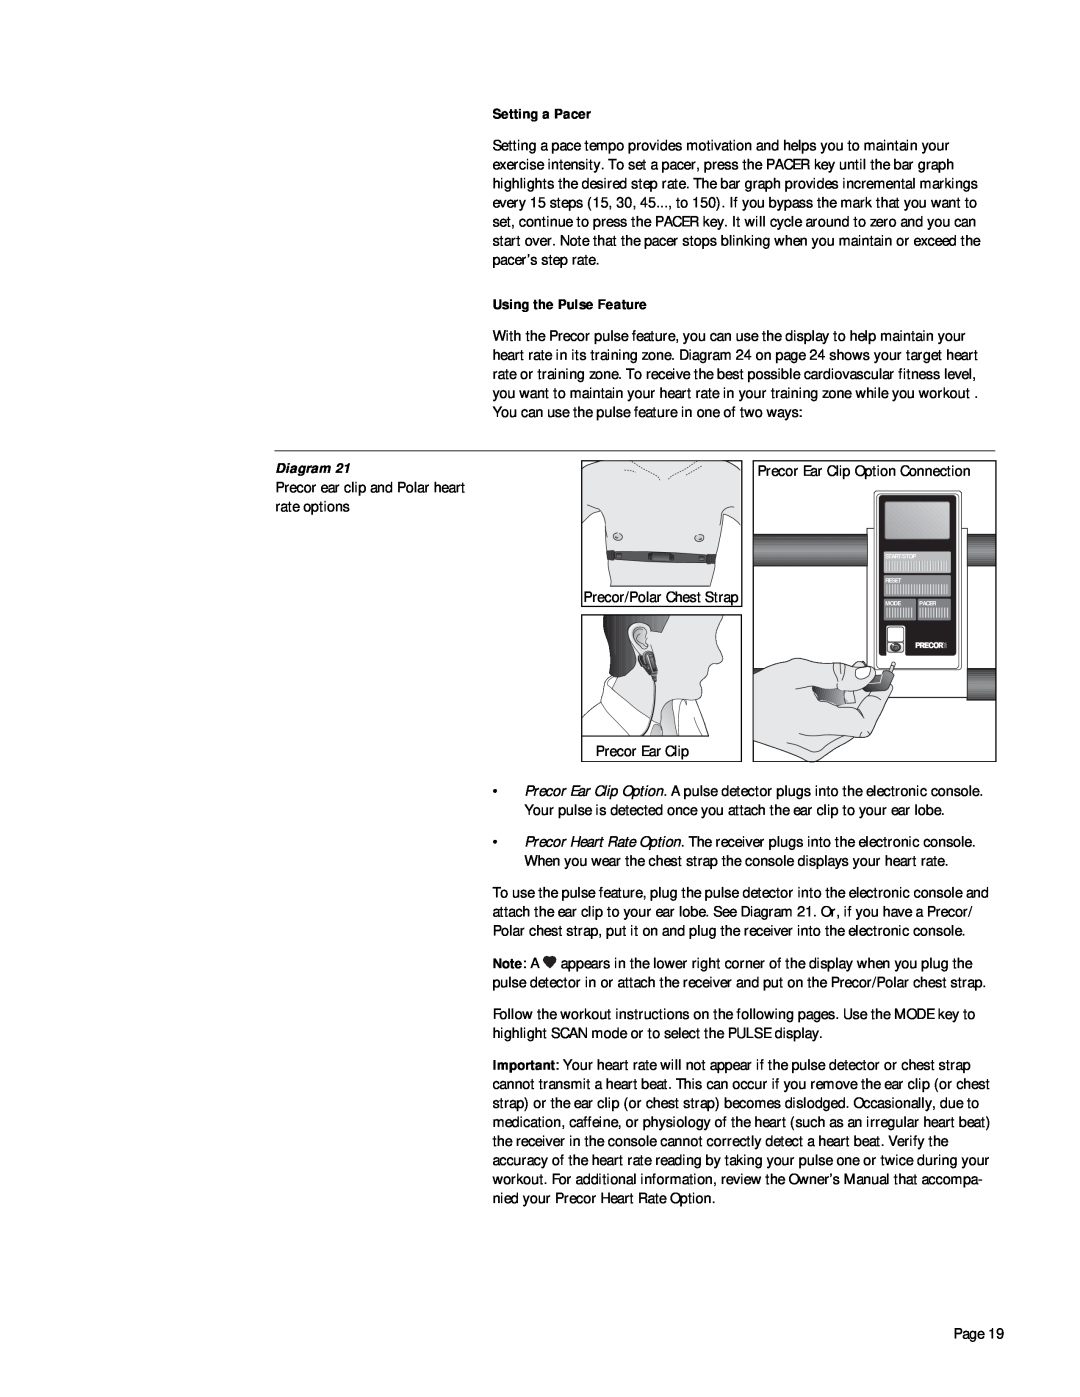 Precor 718e owner manual Setting a Pacer, Using the Pulse Feature 